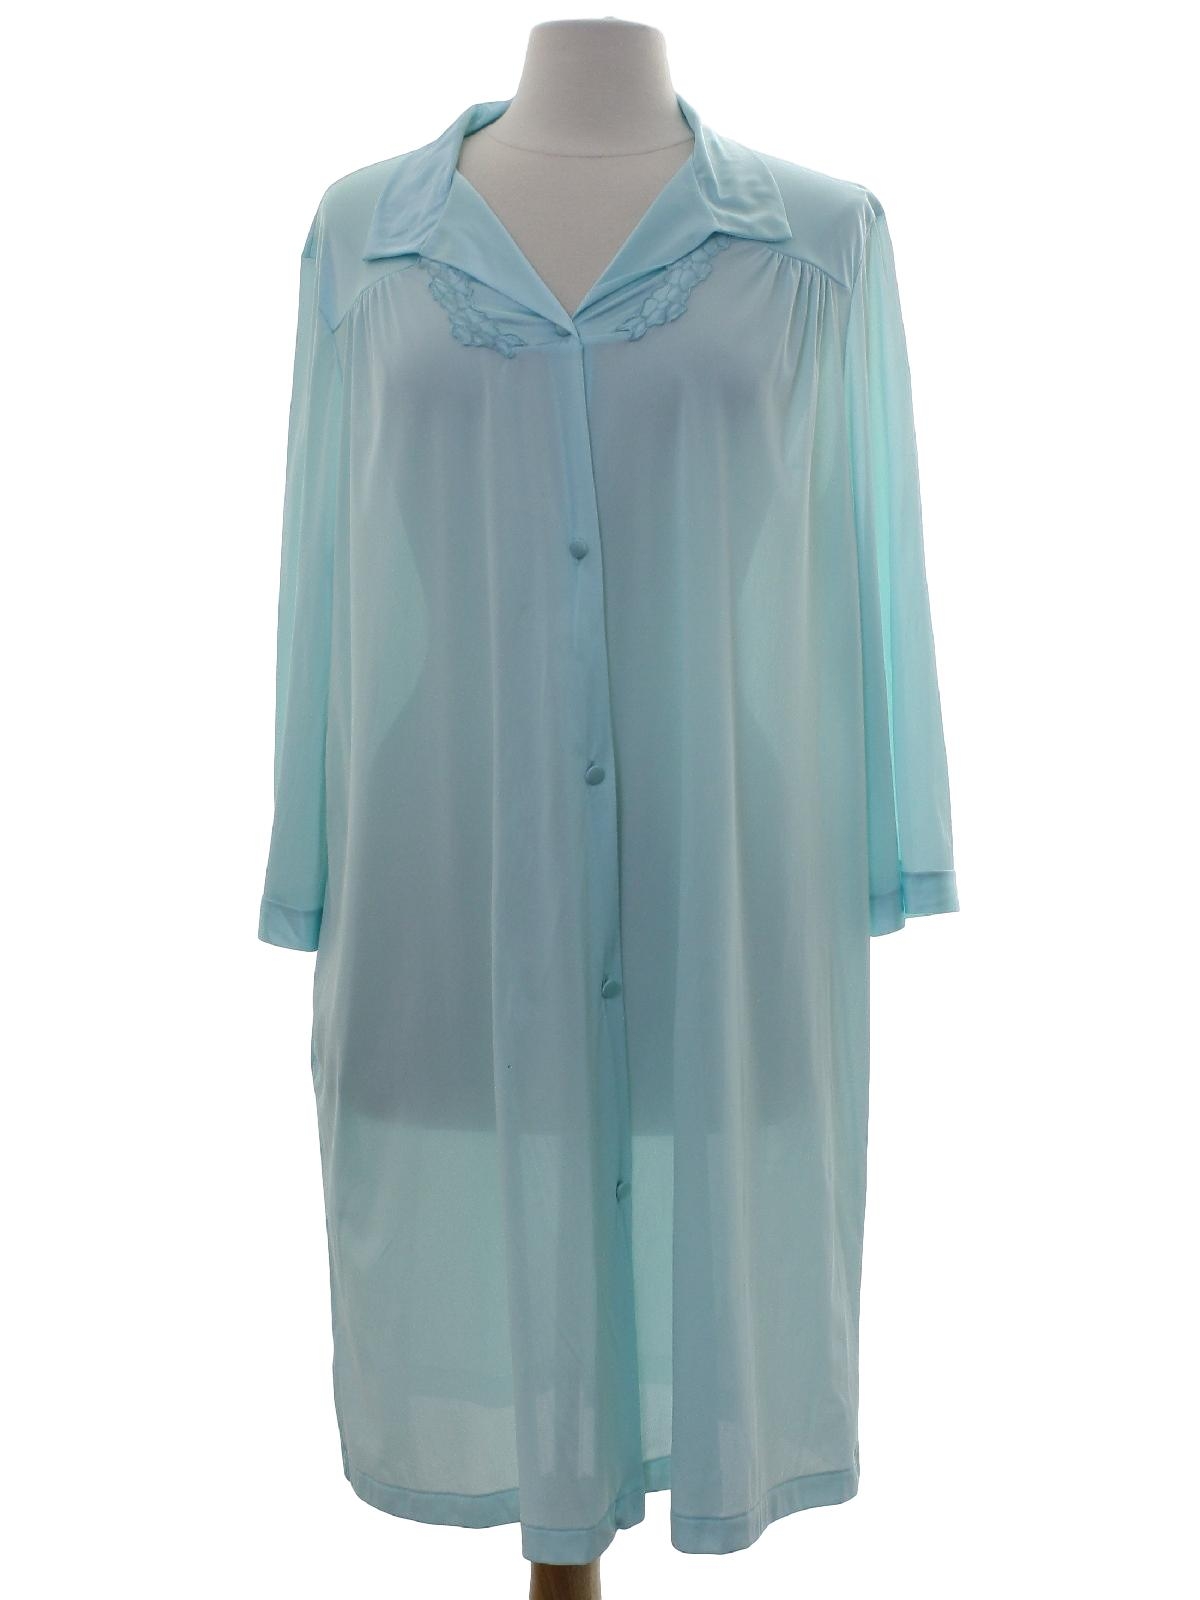 Retro Seventies Womens Lingerie Lounge Robe: Late 70s or Early 80s ...